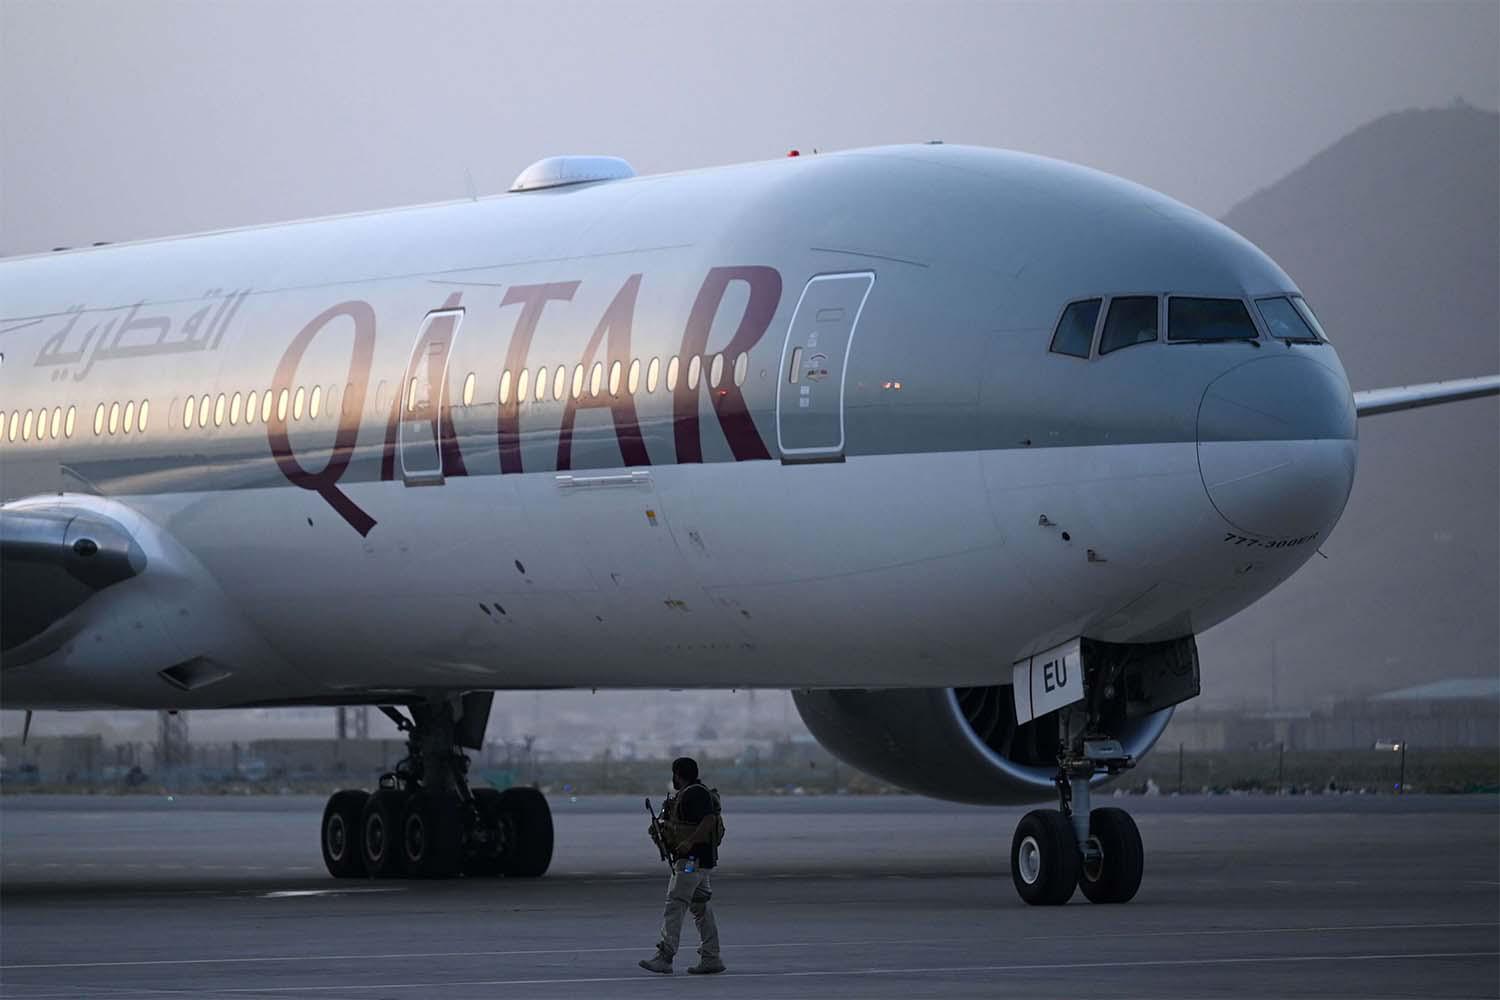 Qatar Airways acknowledged receiving a $3 billion lifeline from the Qatari government to keep operating